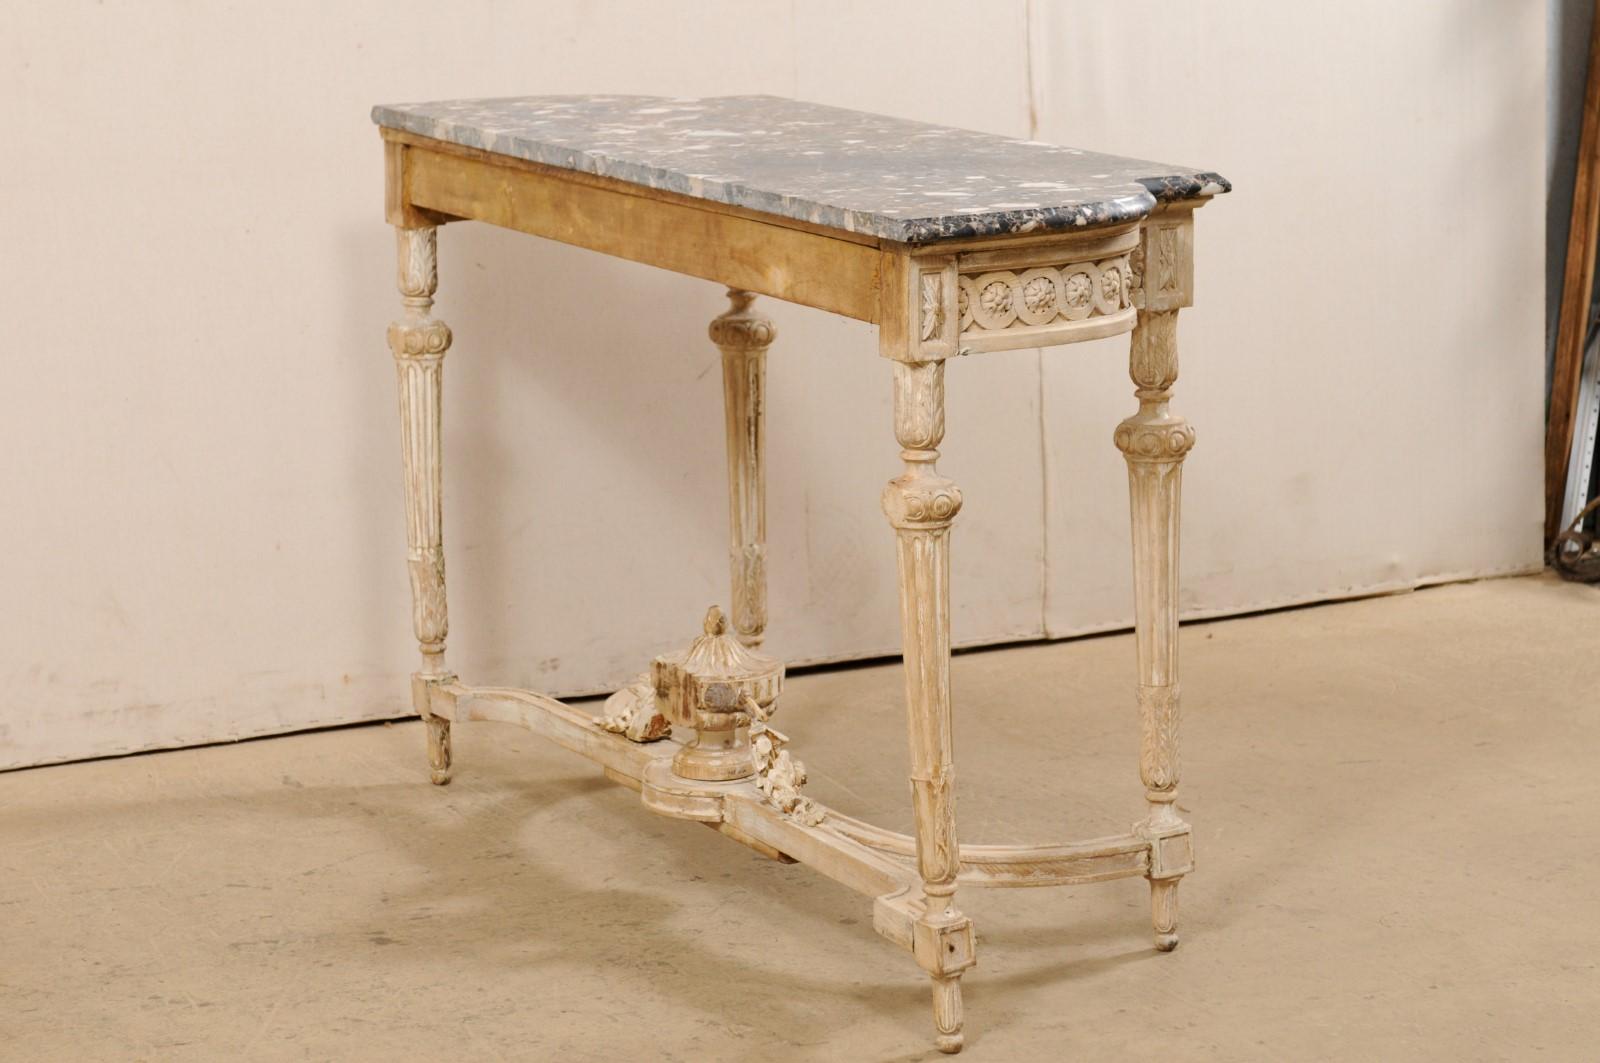 Antique French Marble-Top Console Table with Carved Urn & Foliage at Underside 5